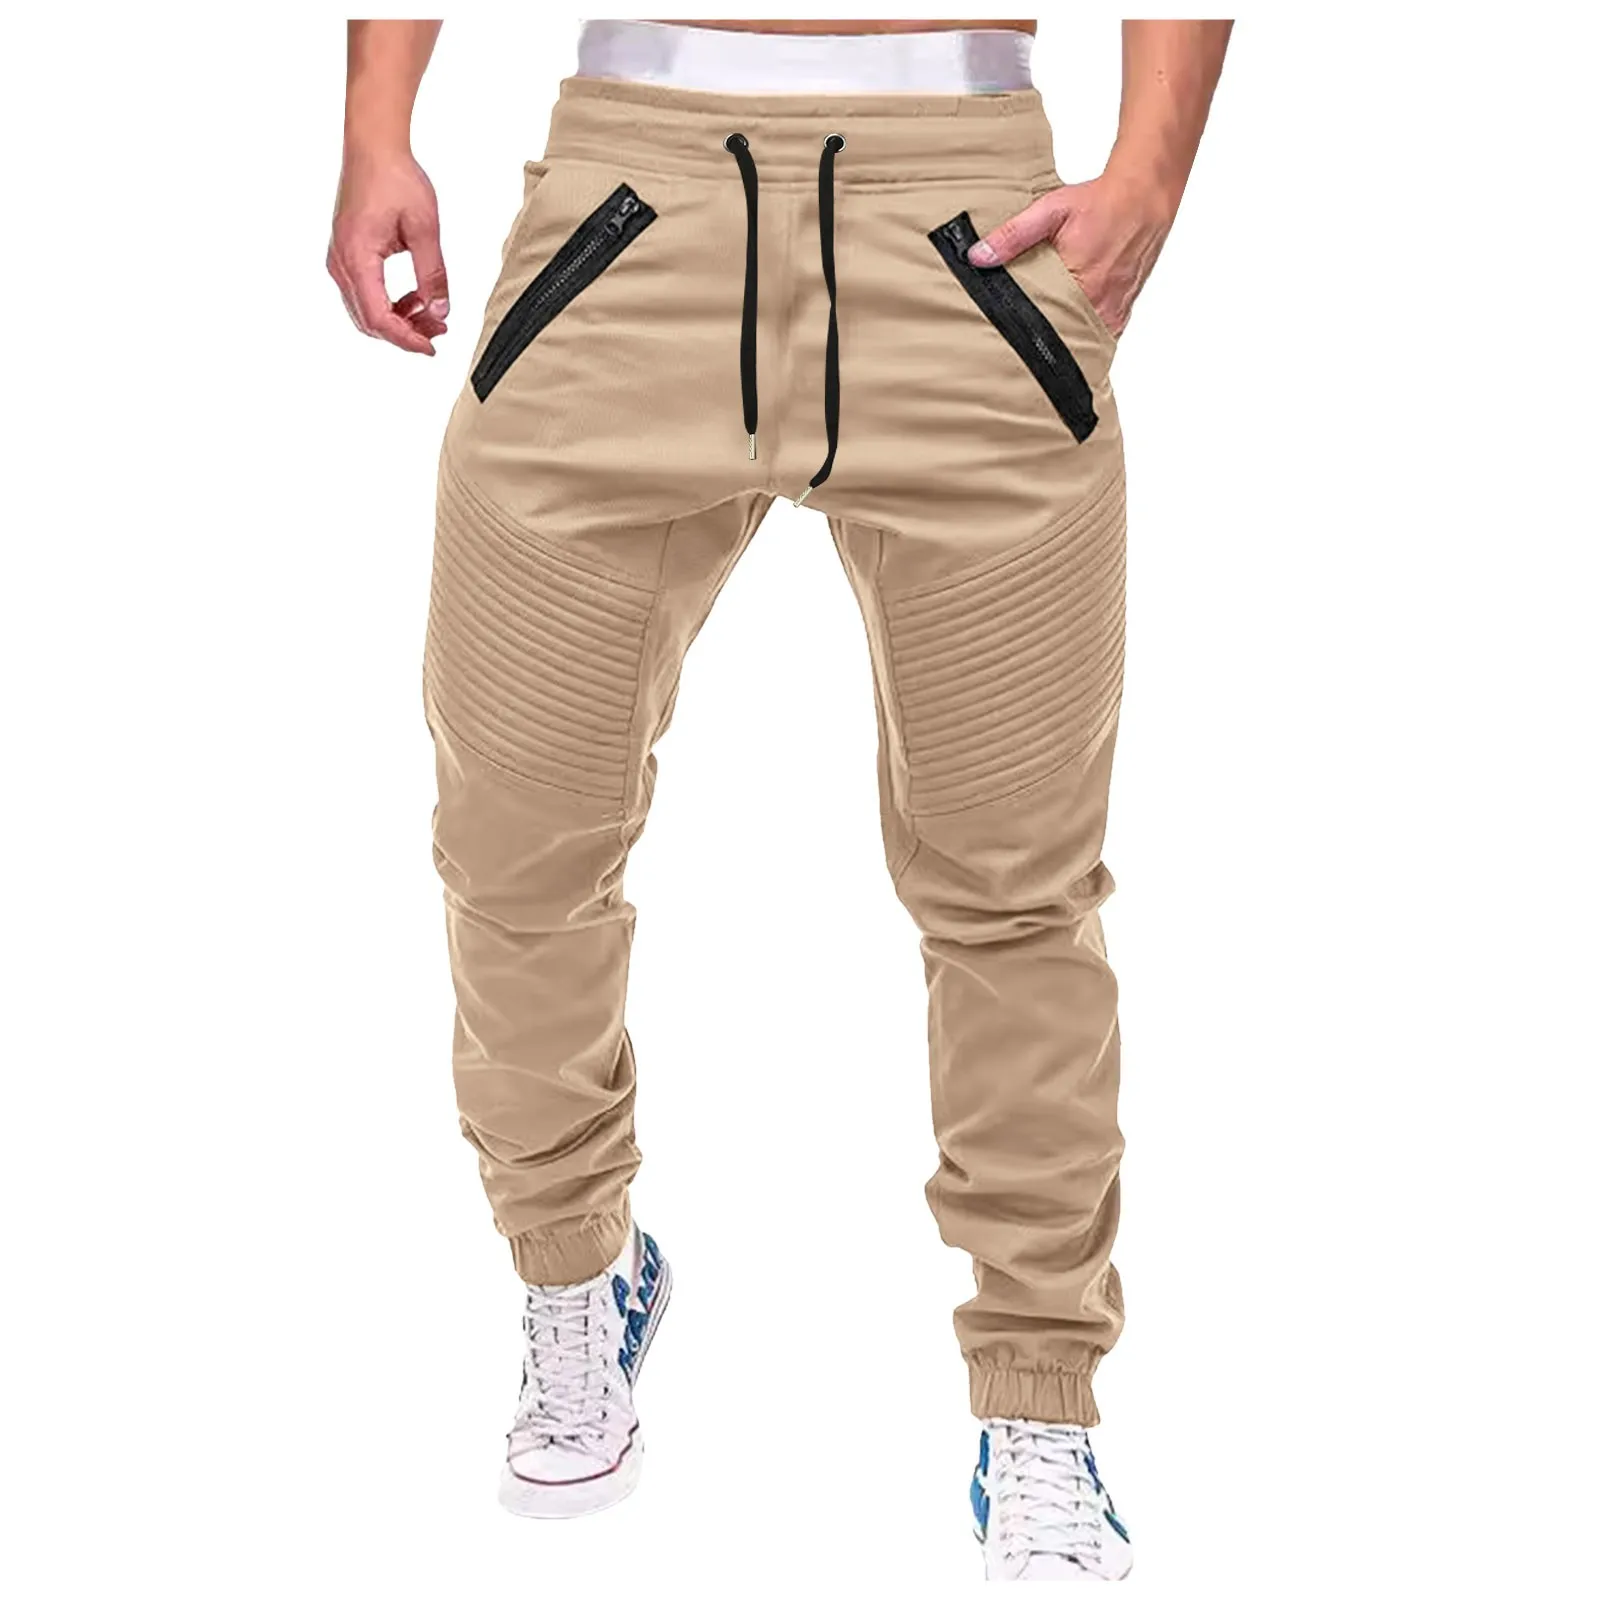 

Men Casual Mid Waist Pants Cuffed Sports Drawstring Elastic Waist Ankle Banded Tapered Pants With Zipper Pockets Sweatpants